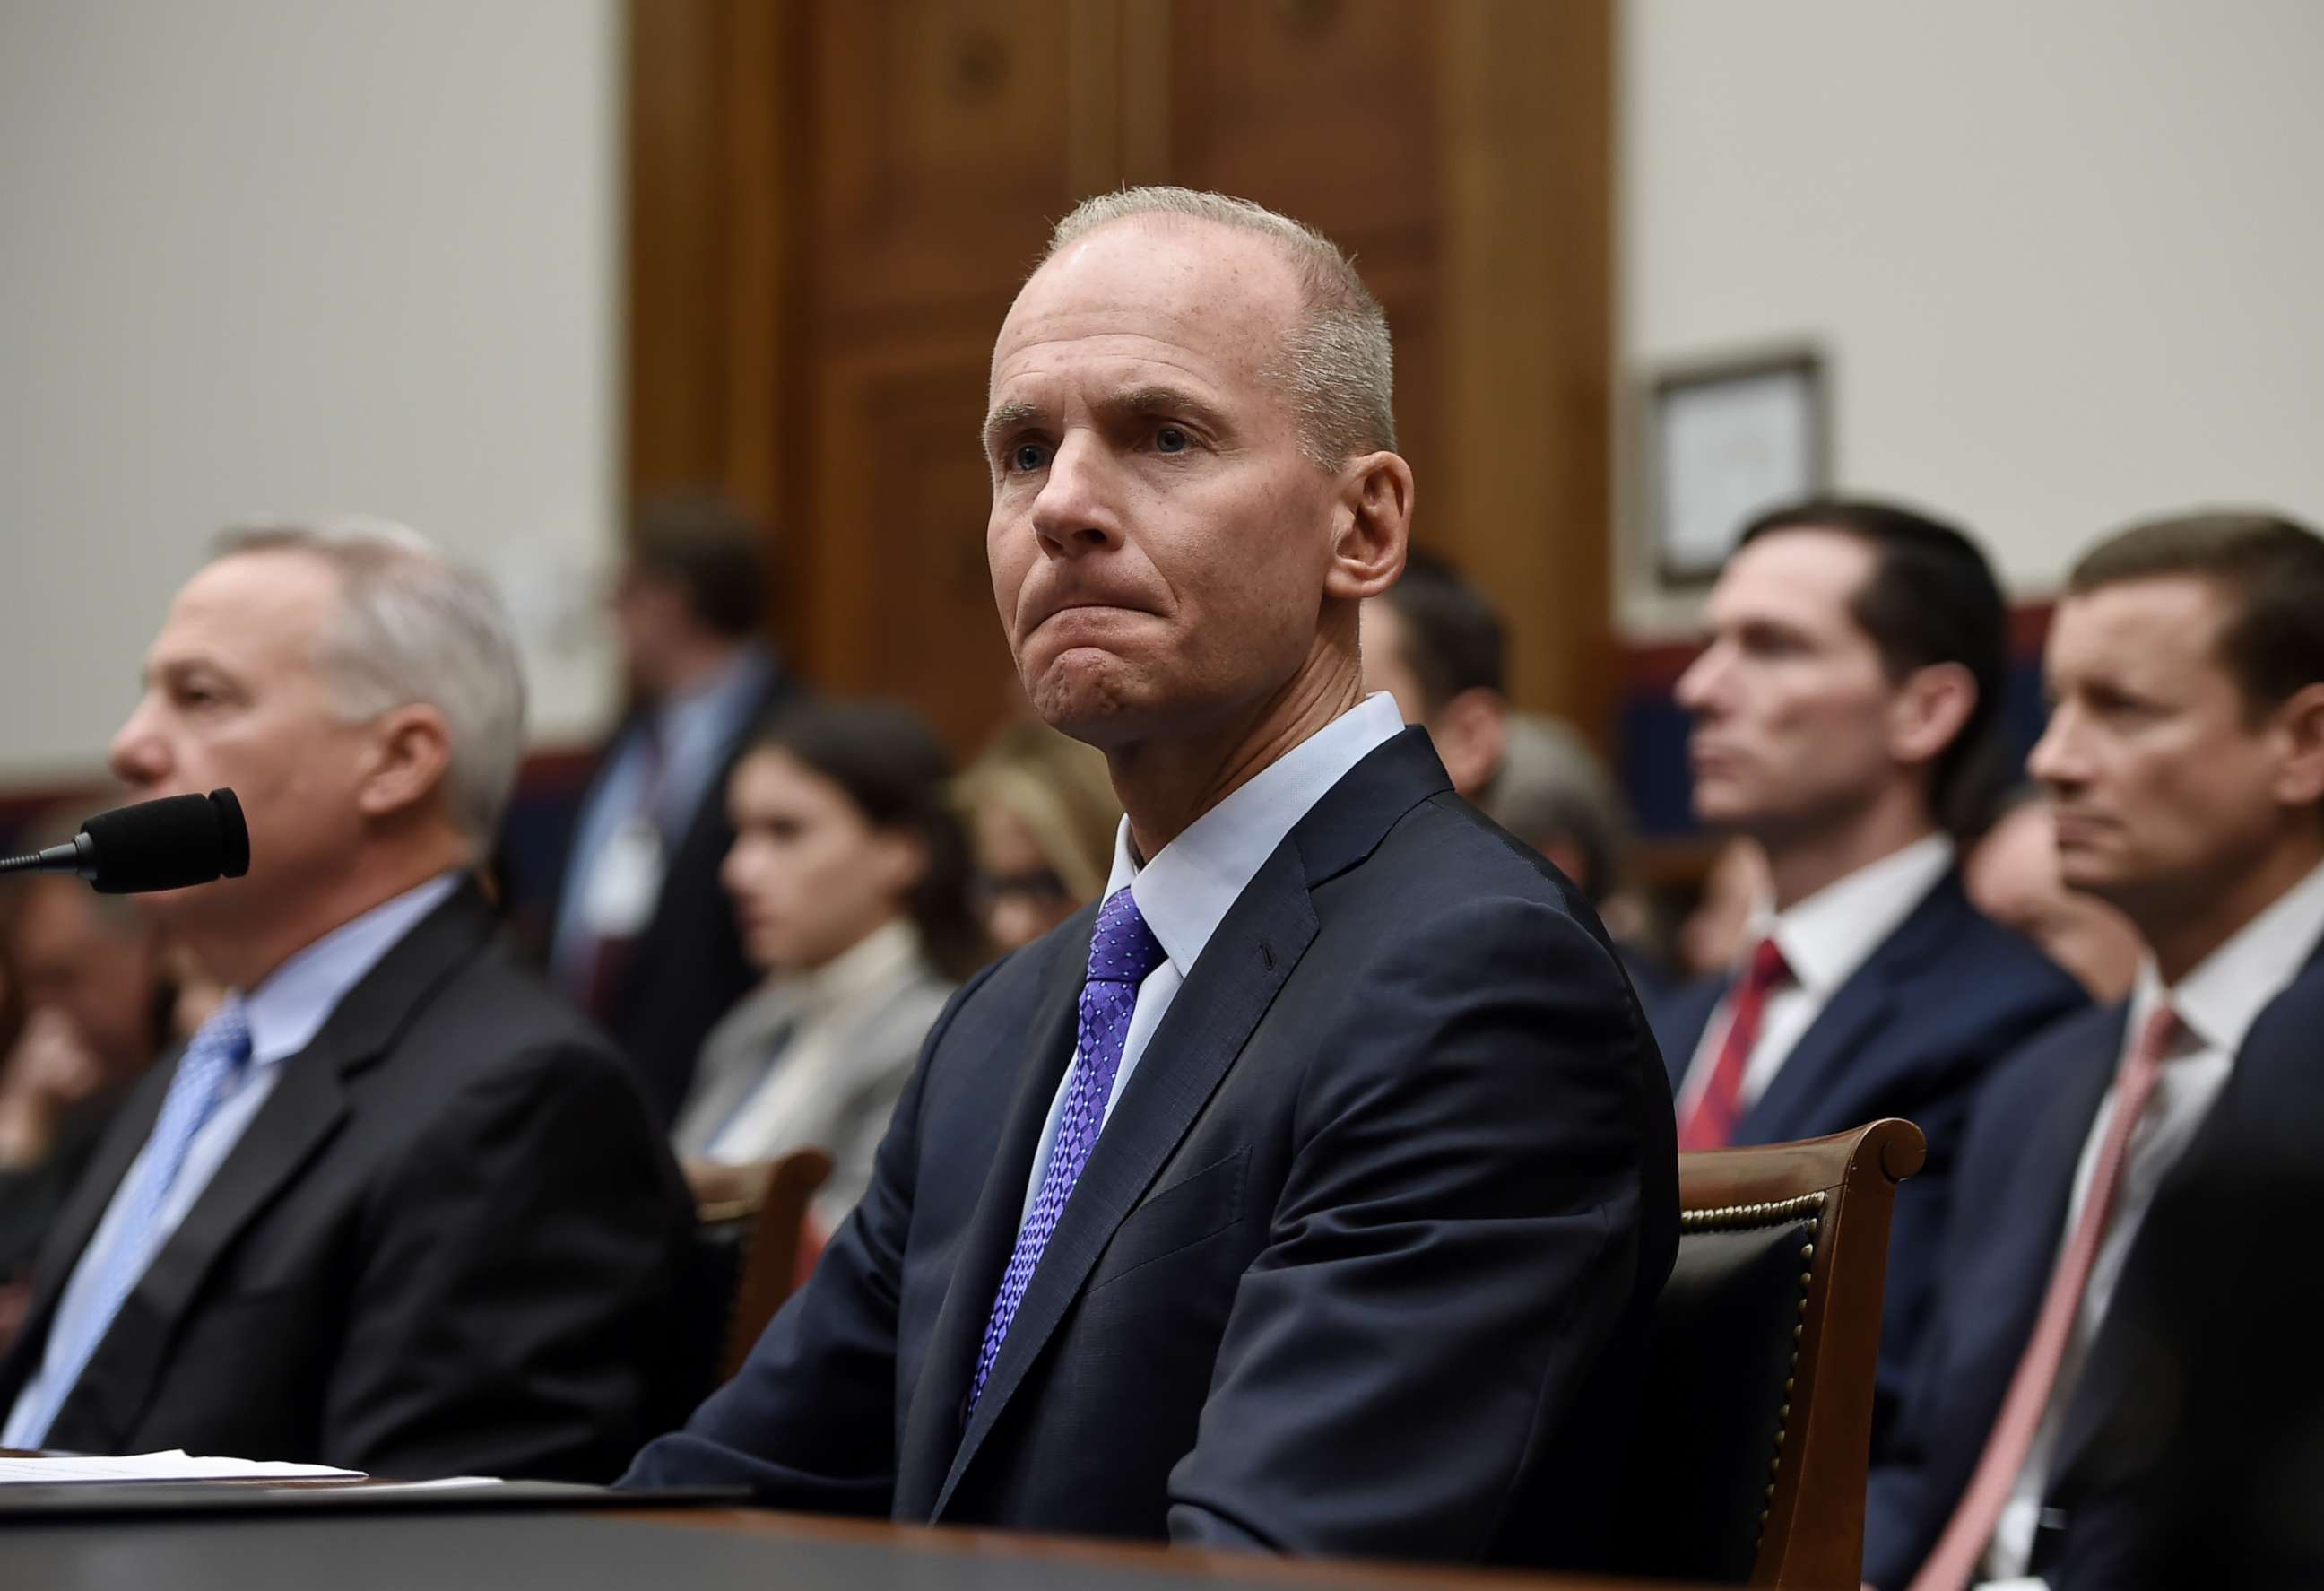 PHOTO: Boeing CEO Dennis Muilenburg arrives to testify at a hearing in front of congressional lawmakers on Capitol Hill in Washington,D.C., Oct. 30, 2019.